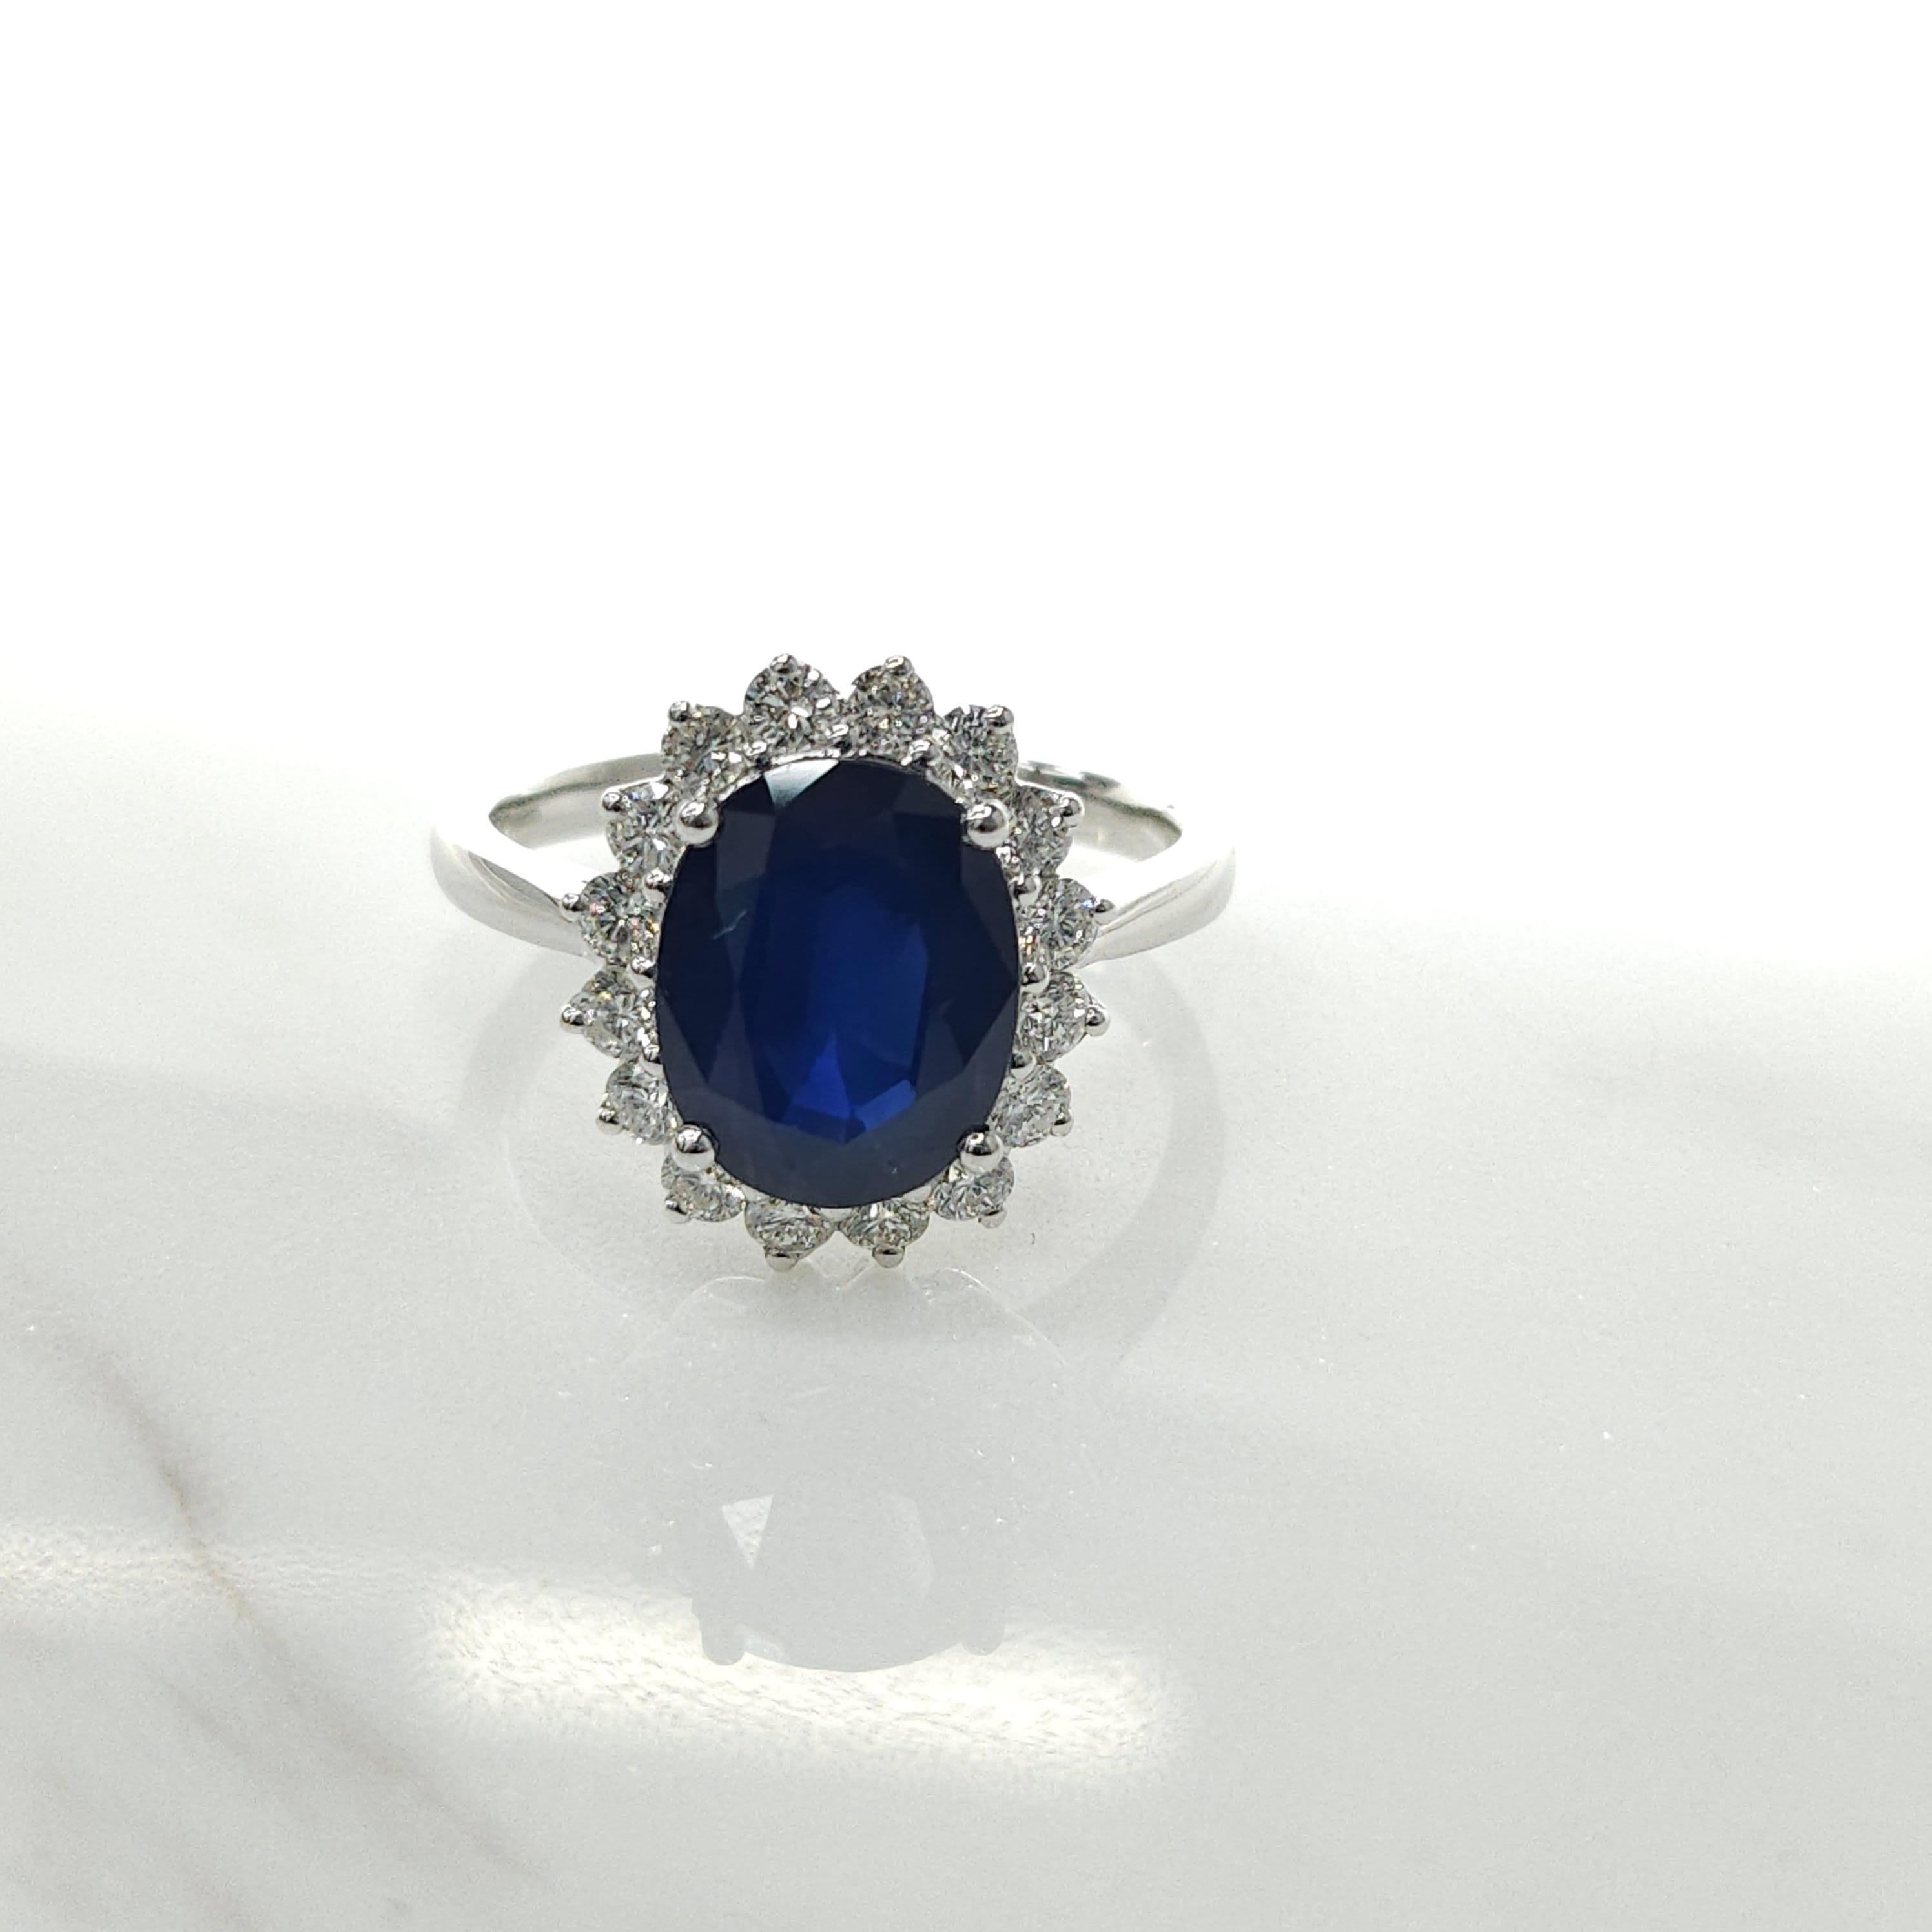 Oval Cut IGI Certified 2.90 Carat Blue Sapphire & Diamond Ring in 18K White Gold For Sale